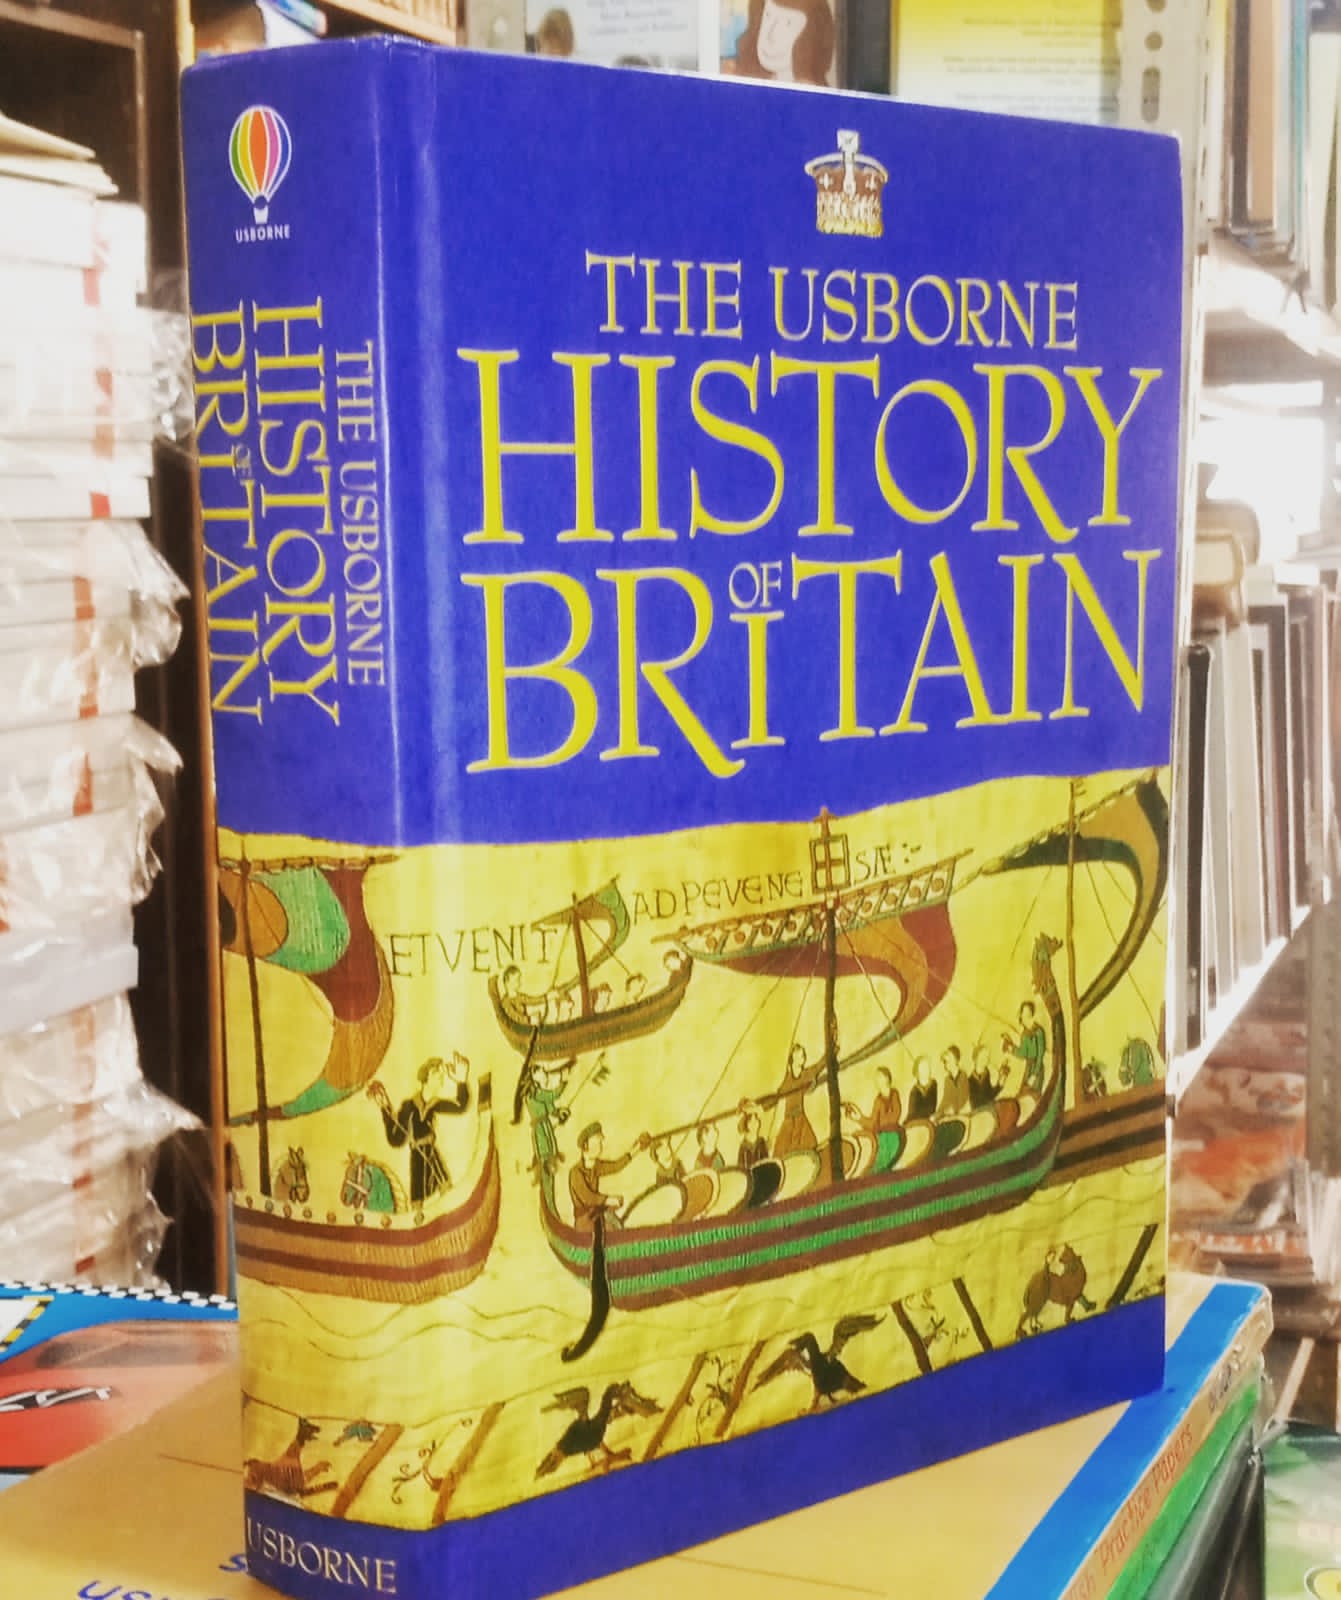 history of britain from the usborne publication. large size hardcover